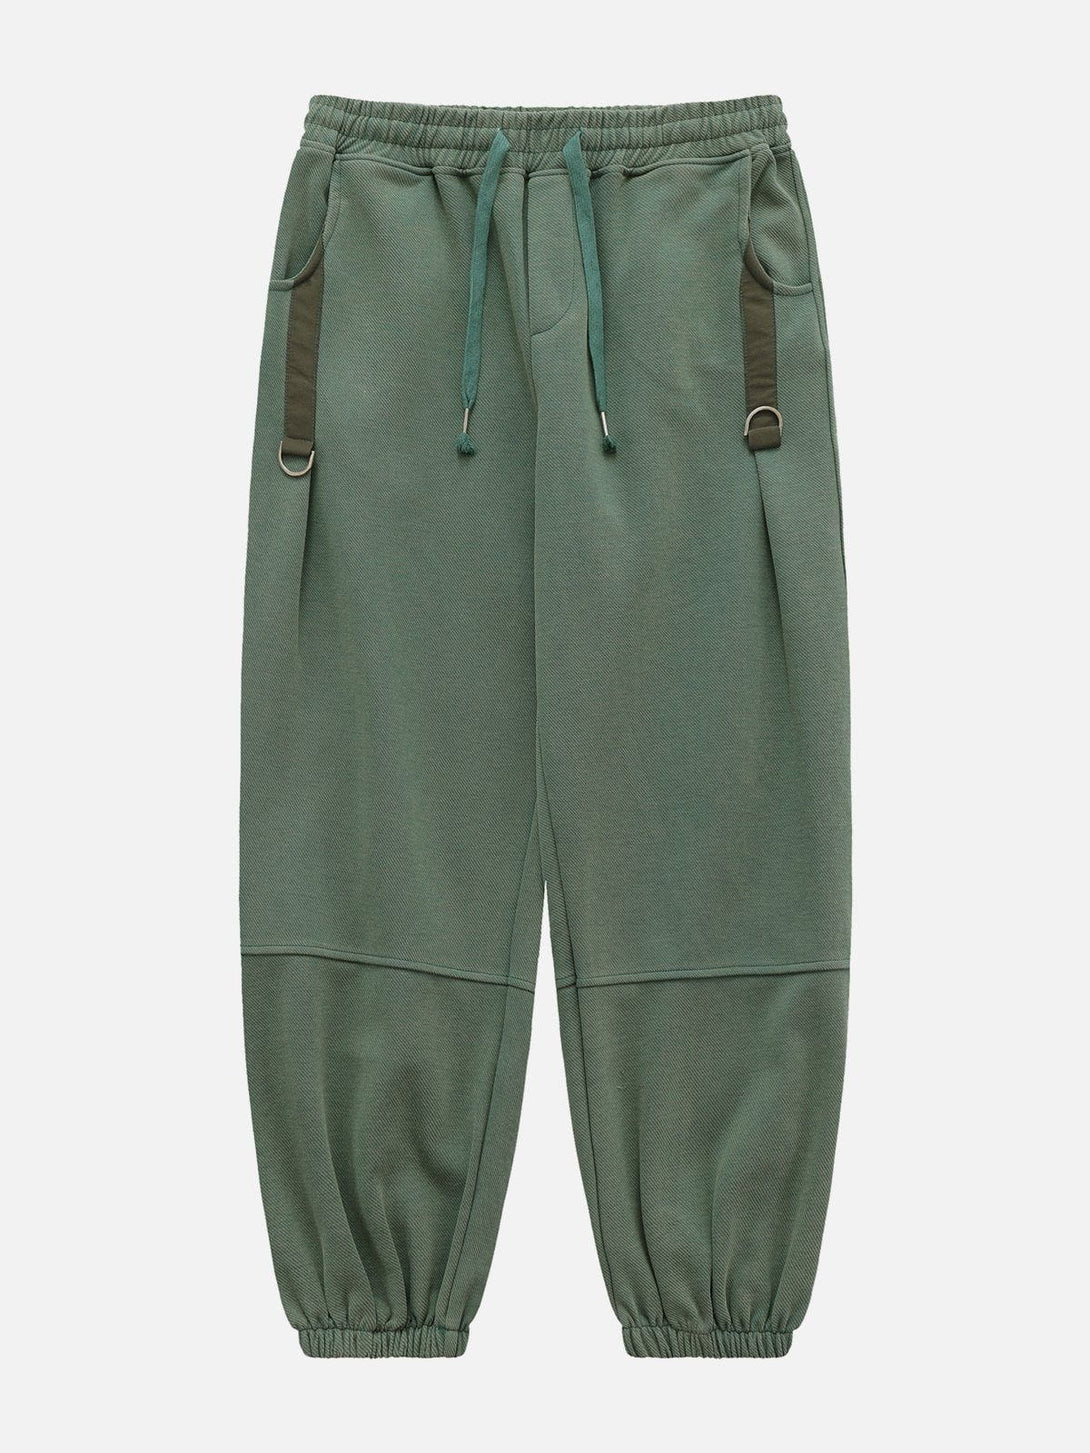 Levefly - Solid Color Ruffle Sweatpants - Streetwear Fashion - levefly.com